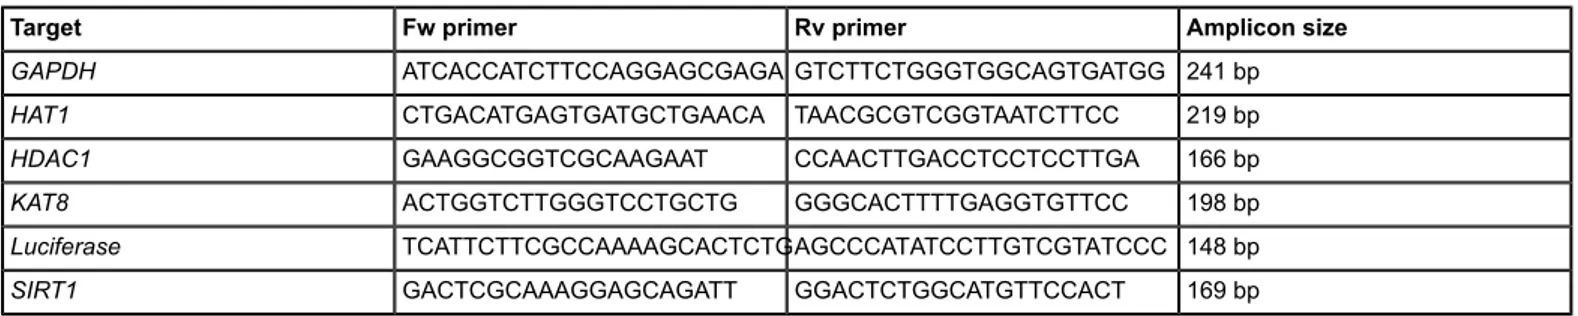 Table 1: Primer Setails. The 5' &gt; 3' sequence of the forward (Fw) and (Rv) primers and the expected amplicon size are given for each transcript analyzed: glyceraldehyde-3-phosphate dehydrogenase (GAPDH), histone acetyl-transferase 1 (HAT1), histone deac